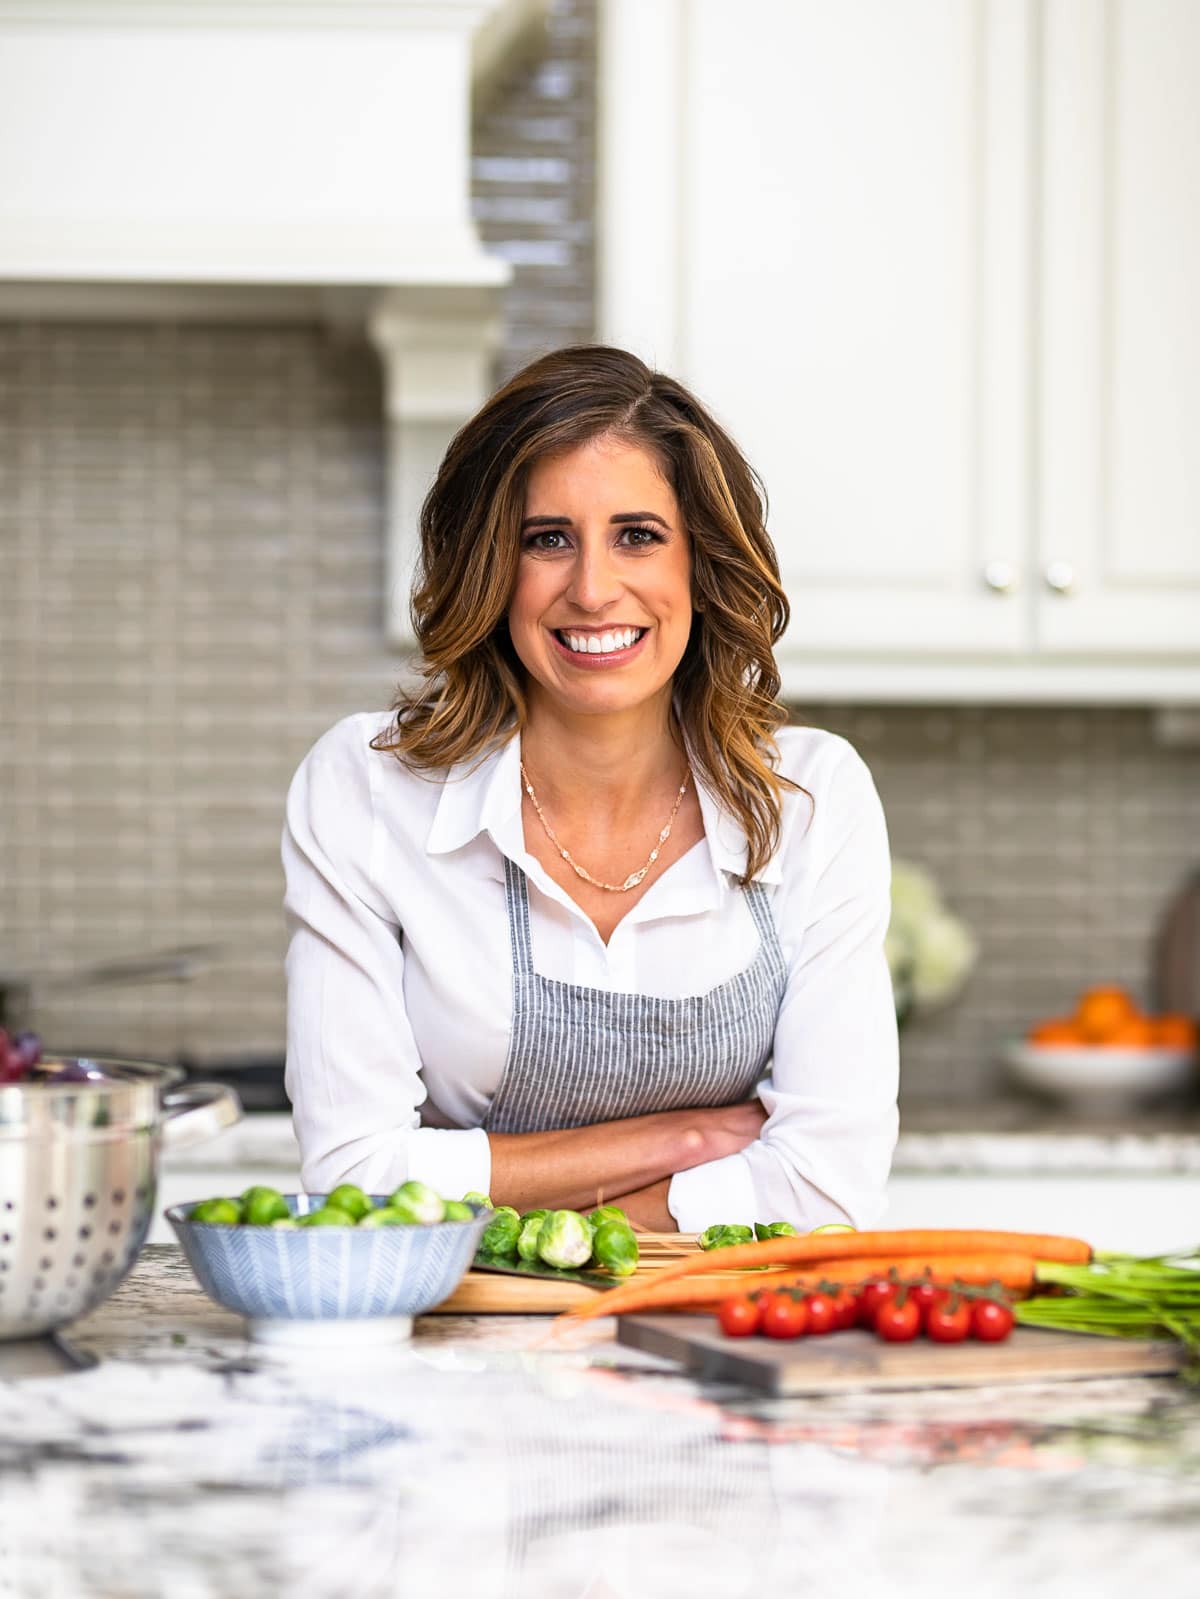 Erin Clarke, author of The Well Plated Cookbook and Well Plated by Erin healthy food blog